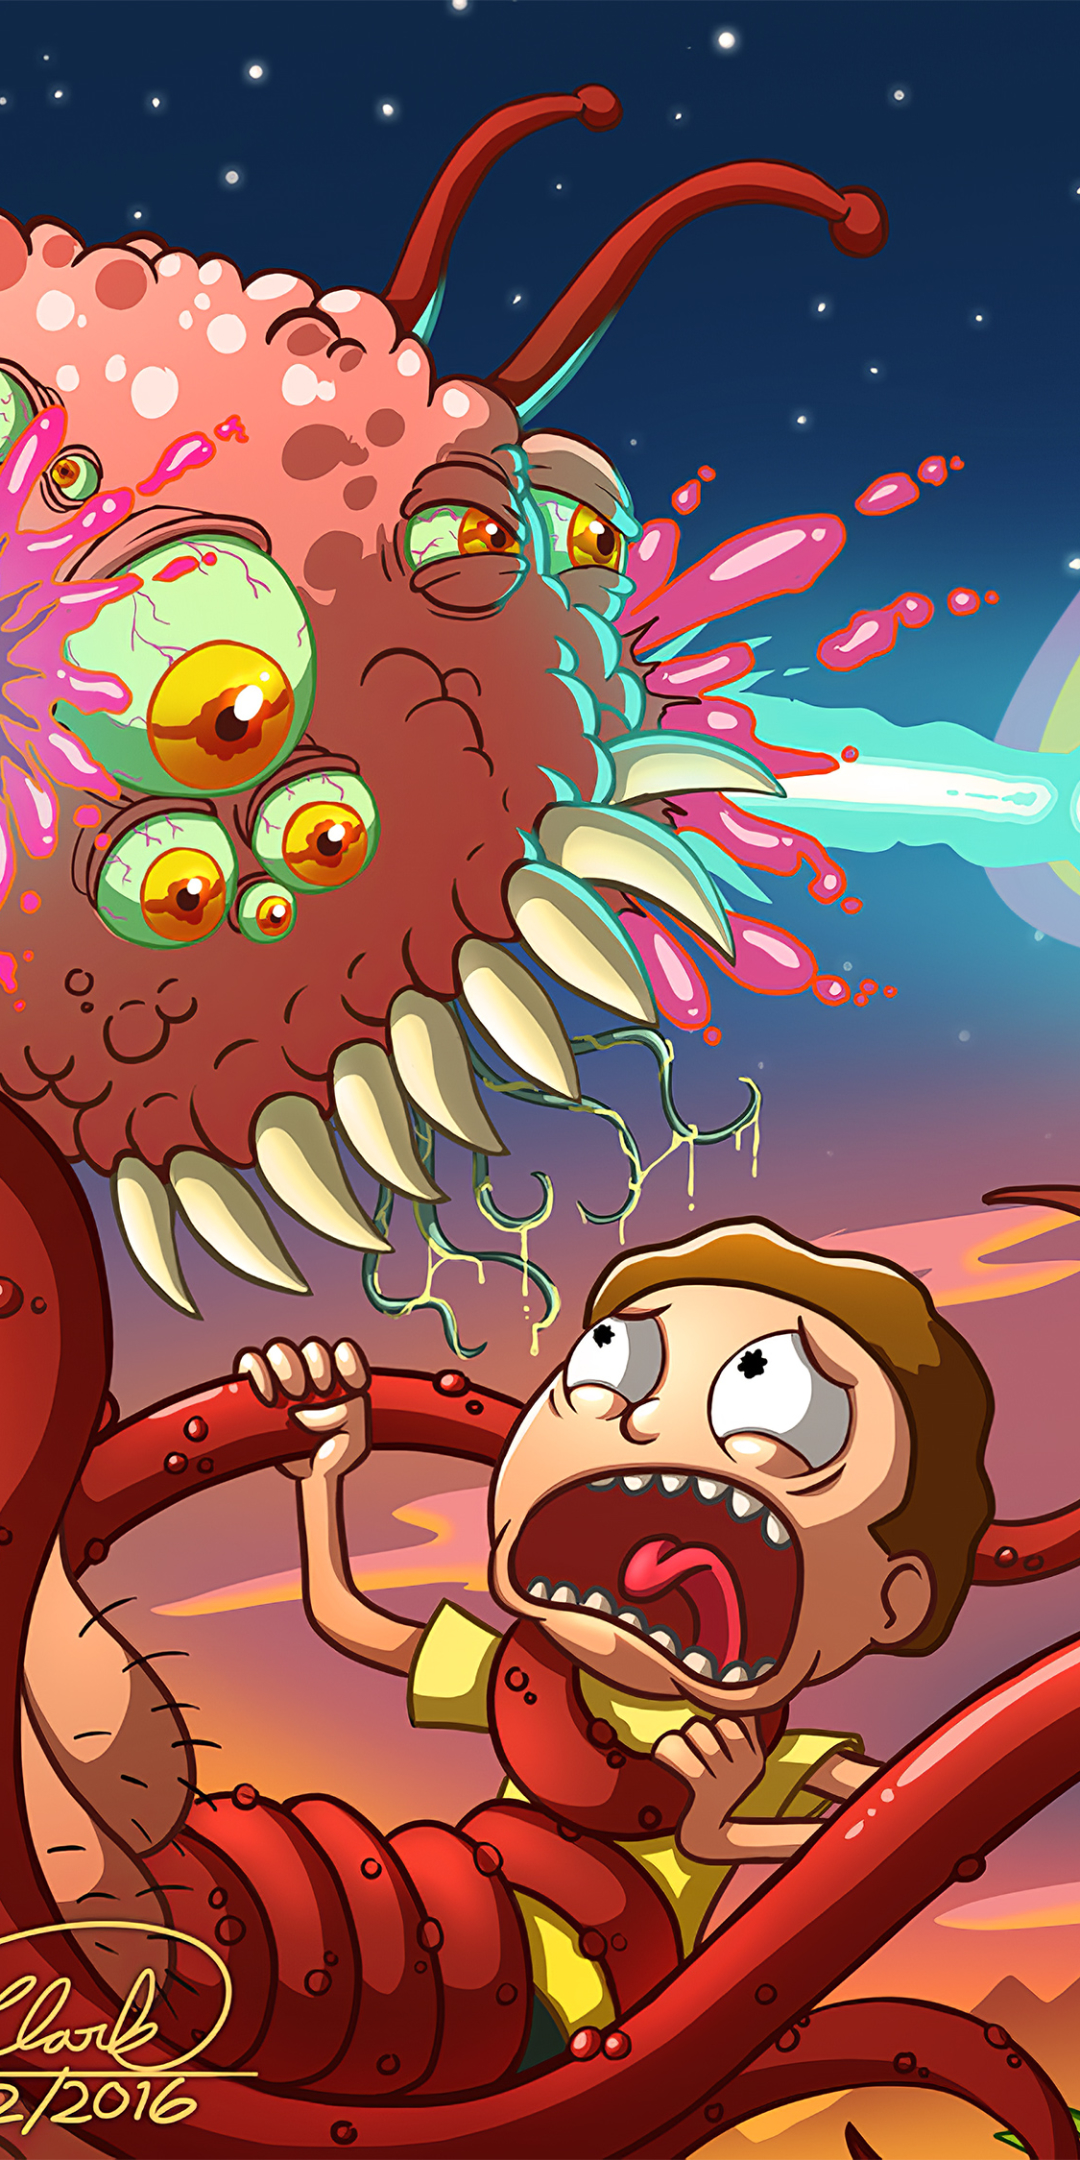 Rick blasting an alien that is about to eat Morty by Sawuinhaff